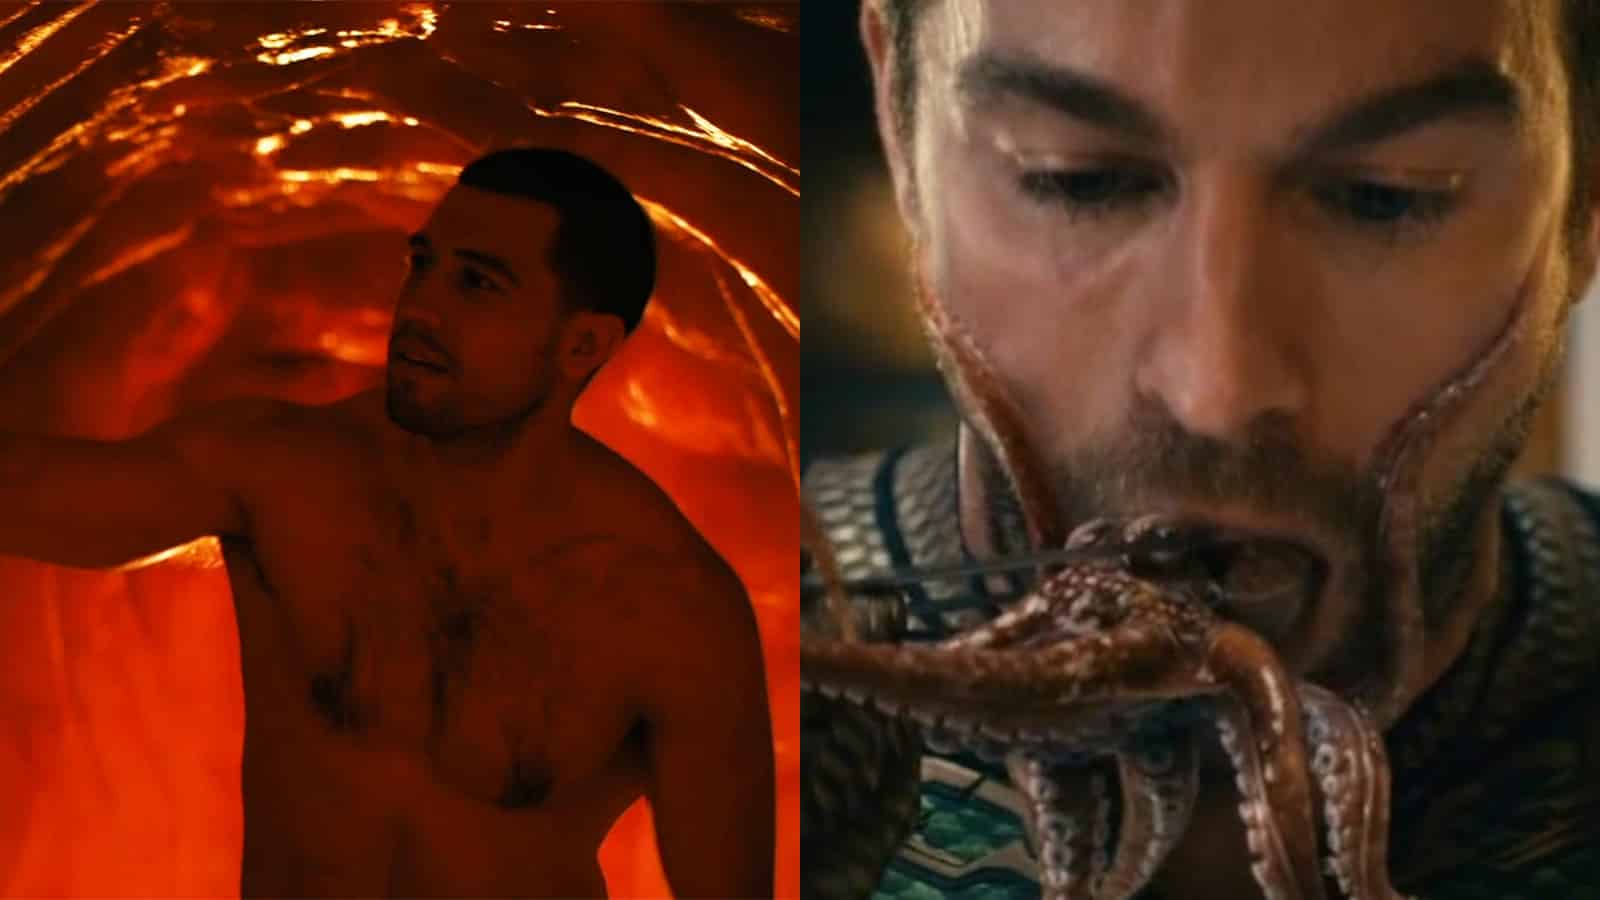 Termite and The Deep eating an octopus in the most shocking moments of The Boys Season 3